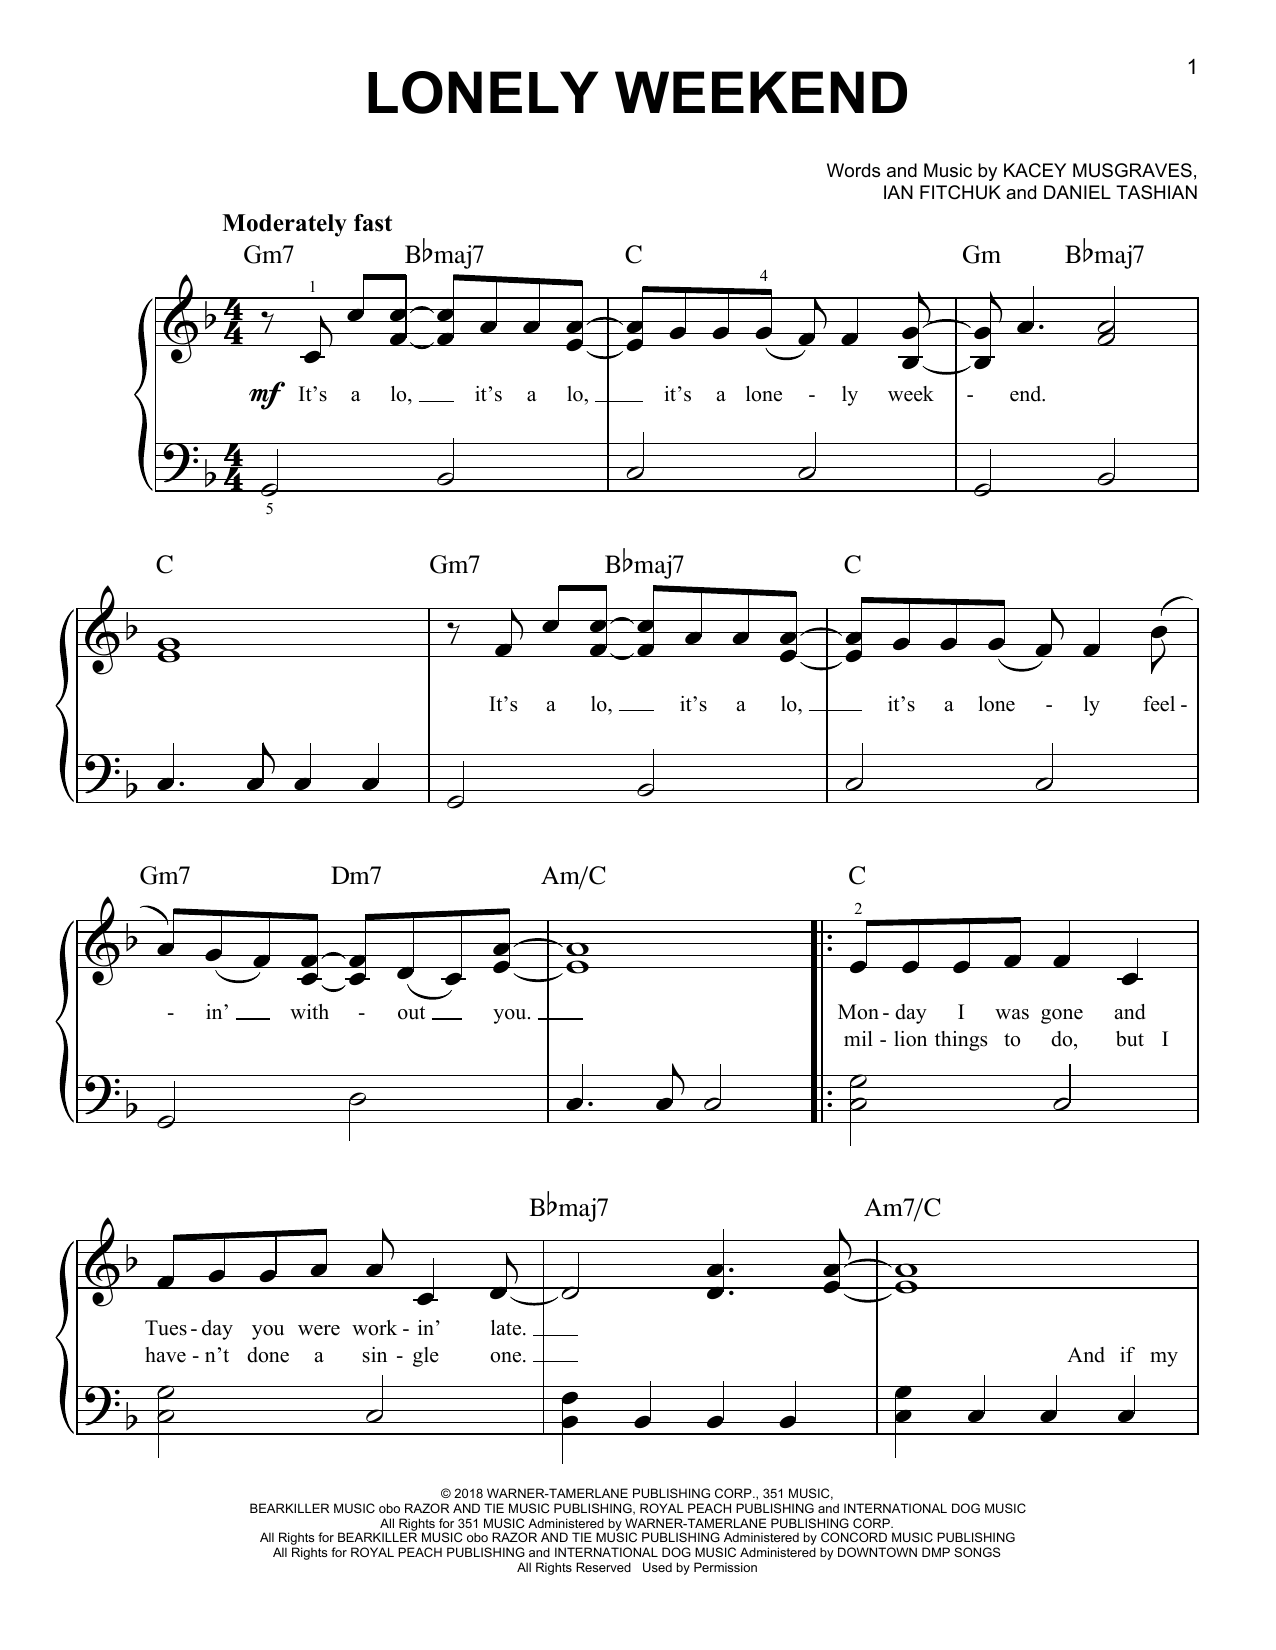 Download Kacey Musgraves Lonely Weekend Sheet Music